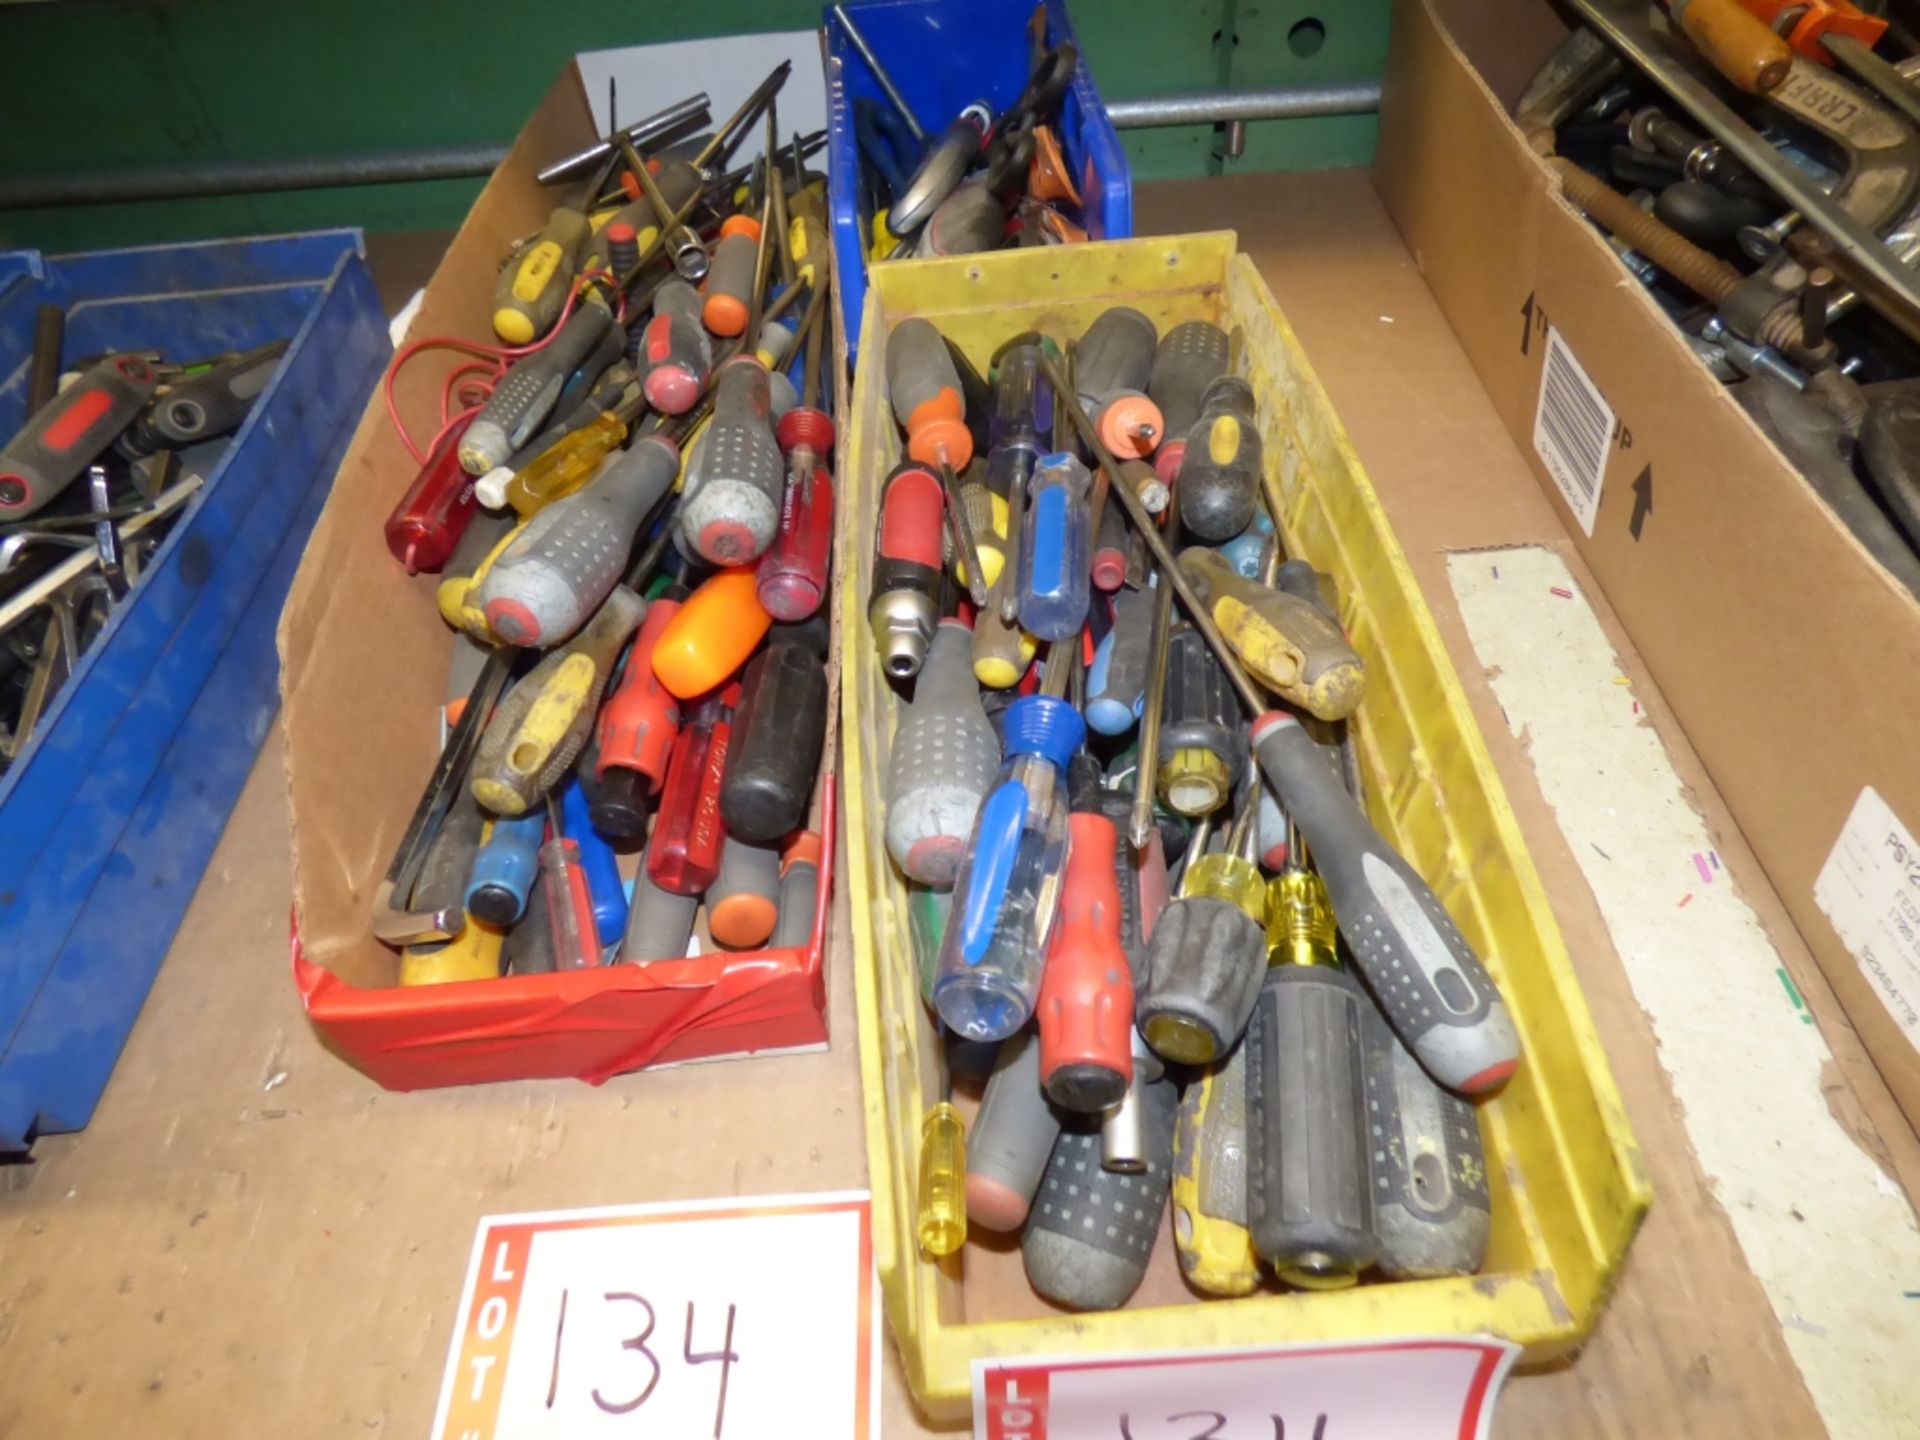 Assorted Screw Drivers & Utility Knives